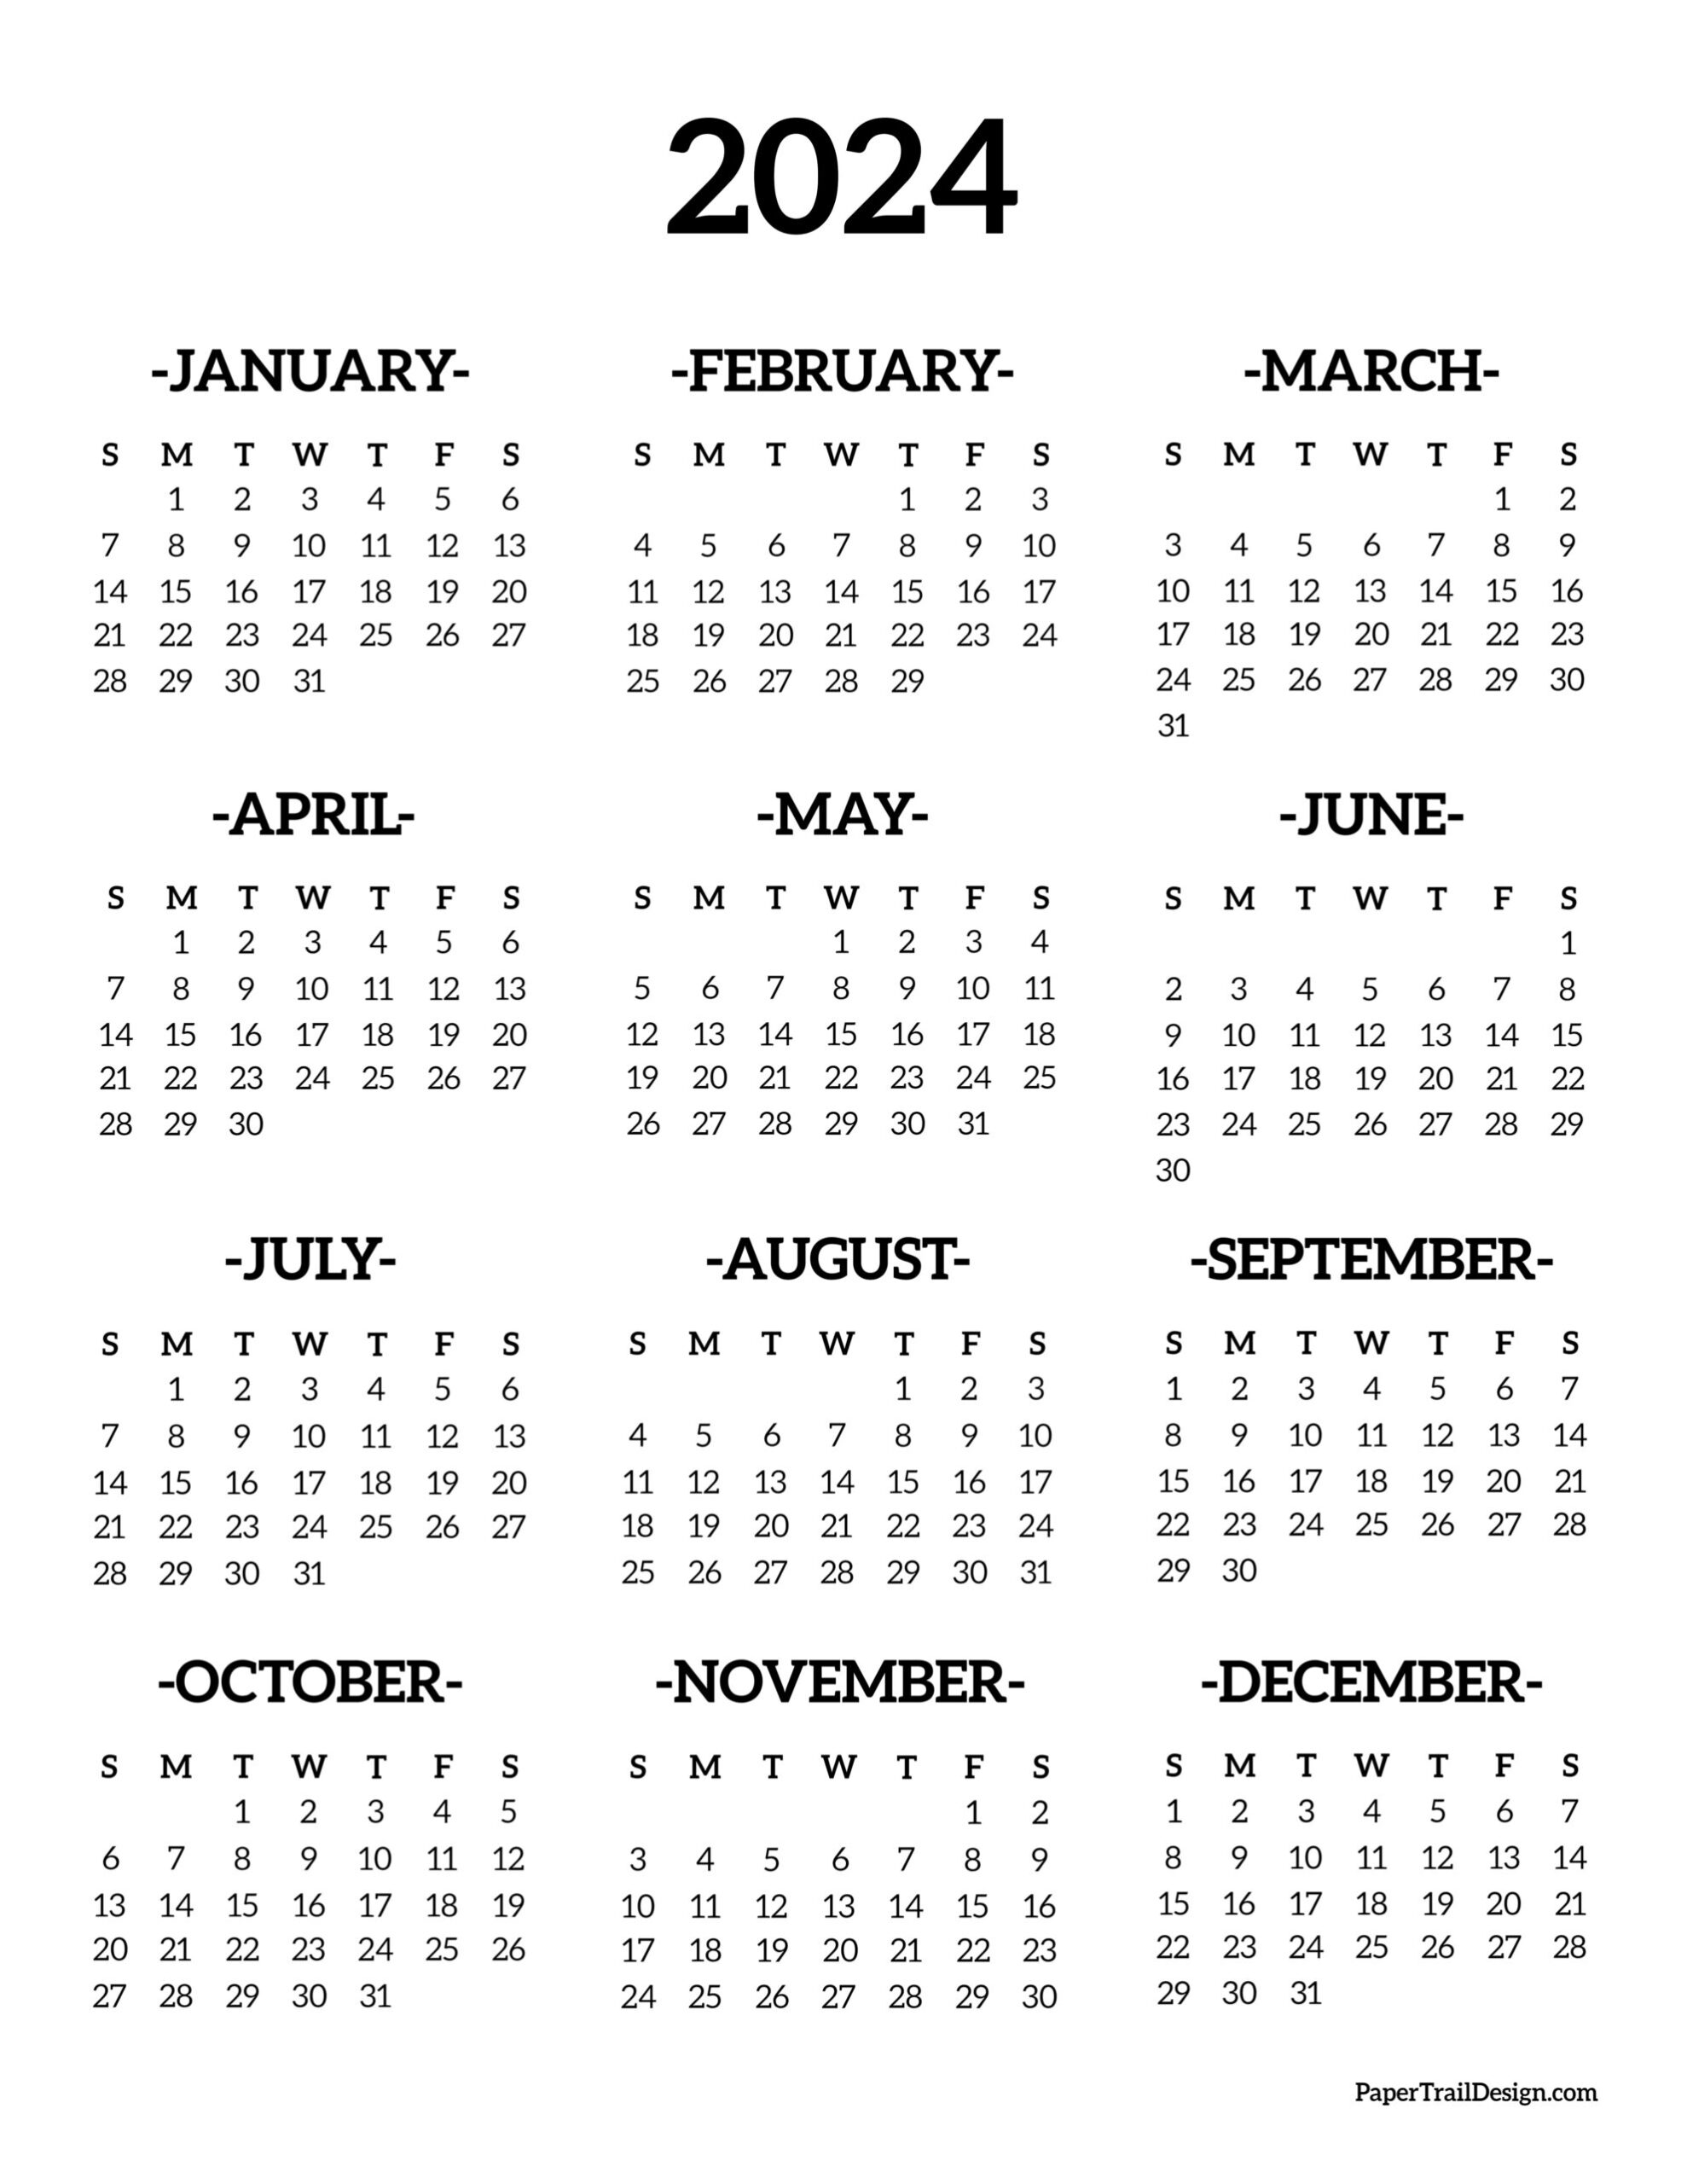 Calendar 2024 Printable One Page - Paper Trail Design for Calendar Pages Printable 2024